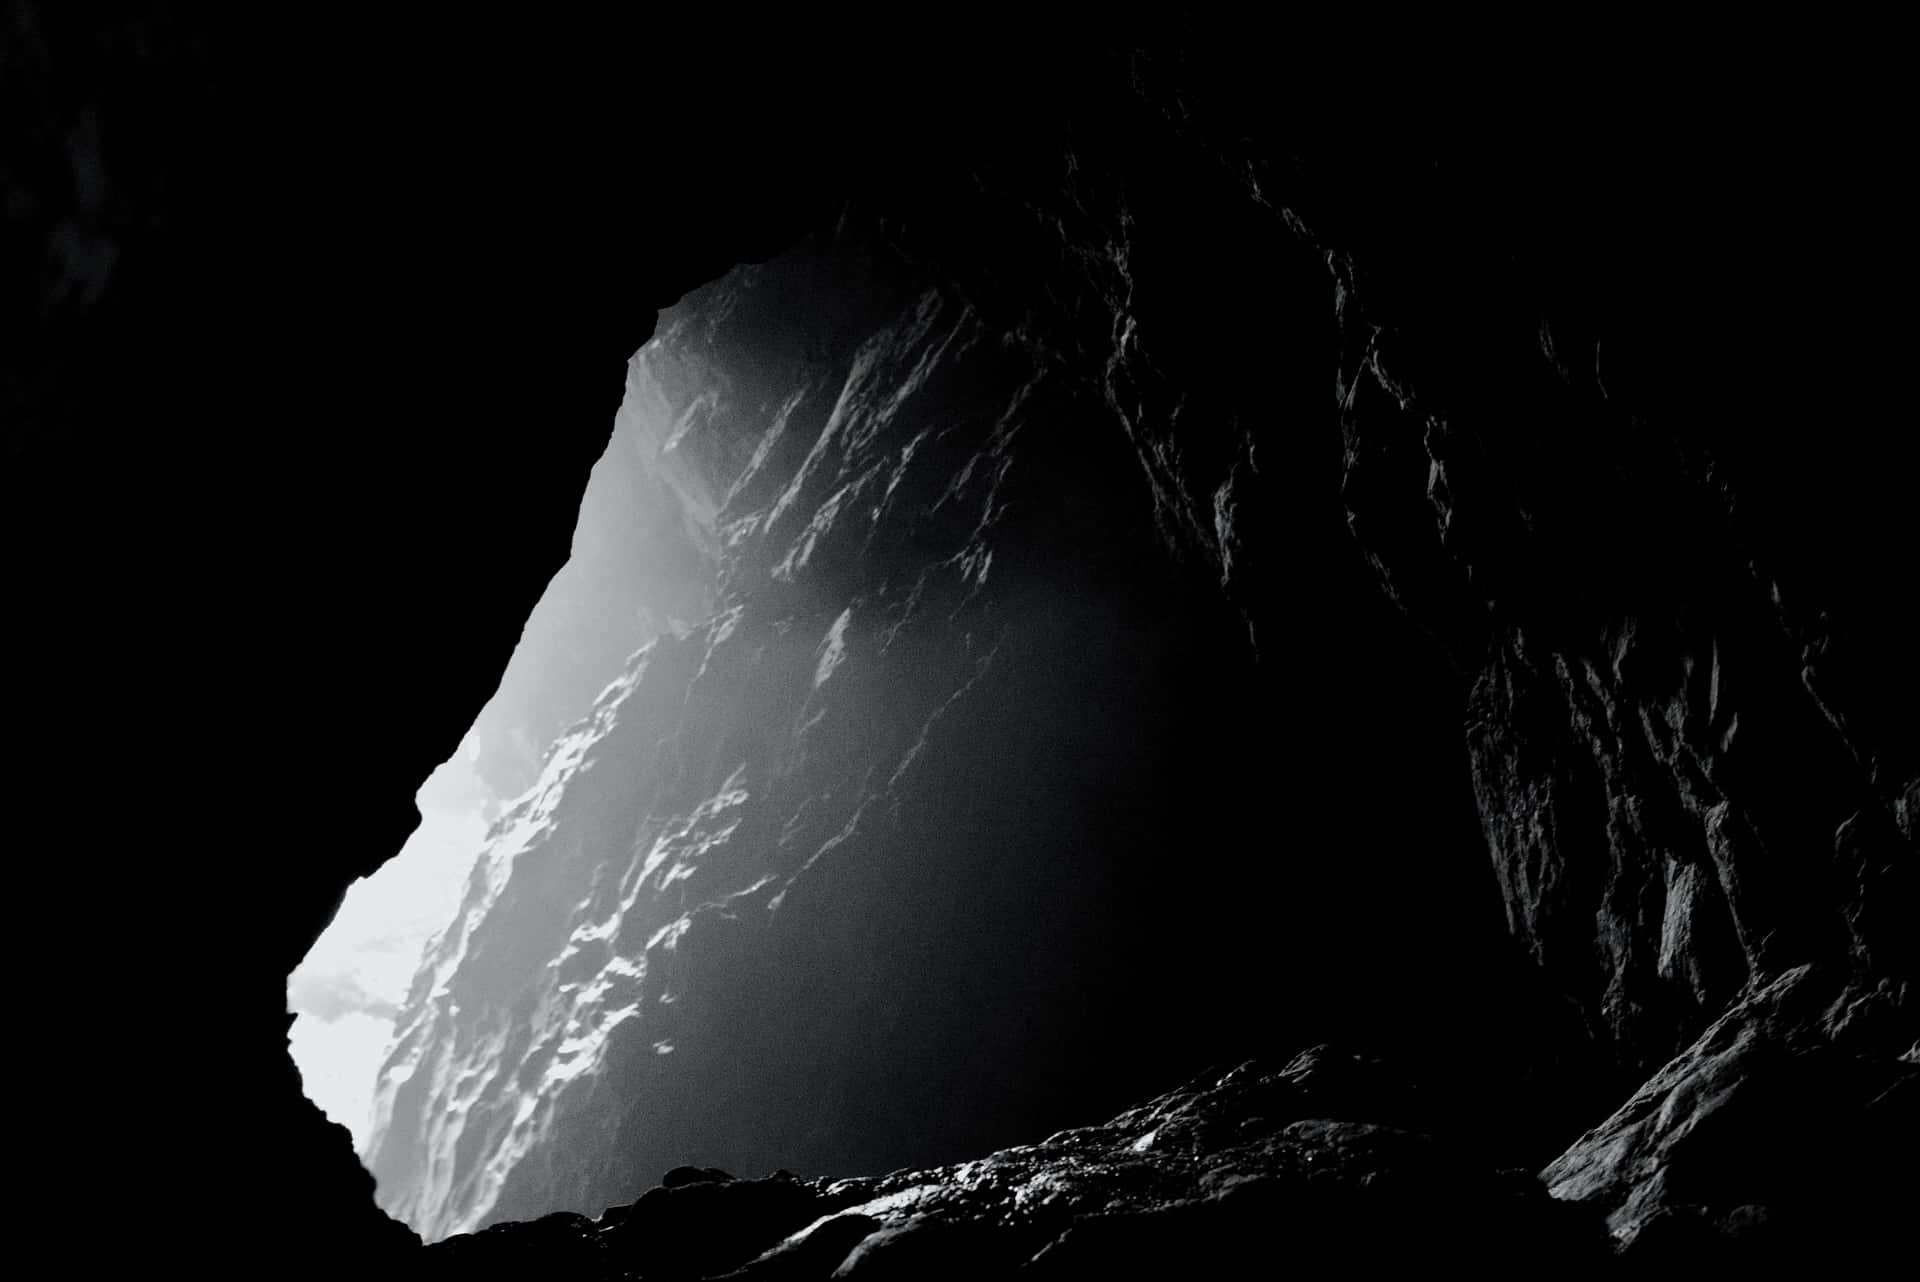 A Black And White Photo Of A Cave With A Light Shining Through